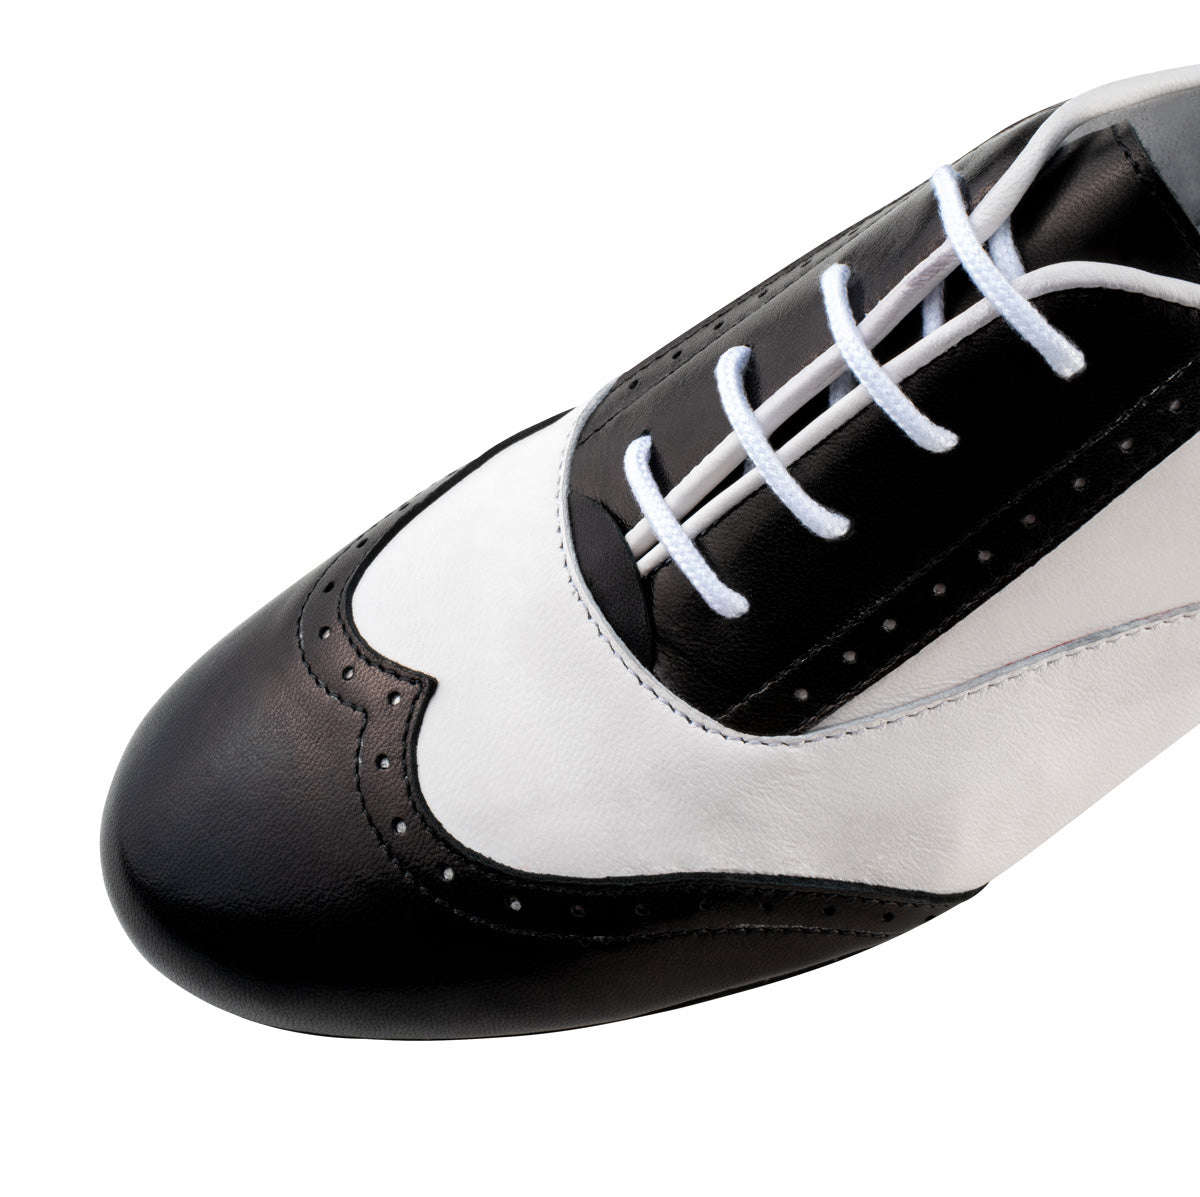 Taylor Women's Black and White Nappa Leather Dance Shoe for West Coast Swing